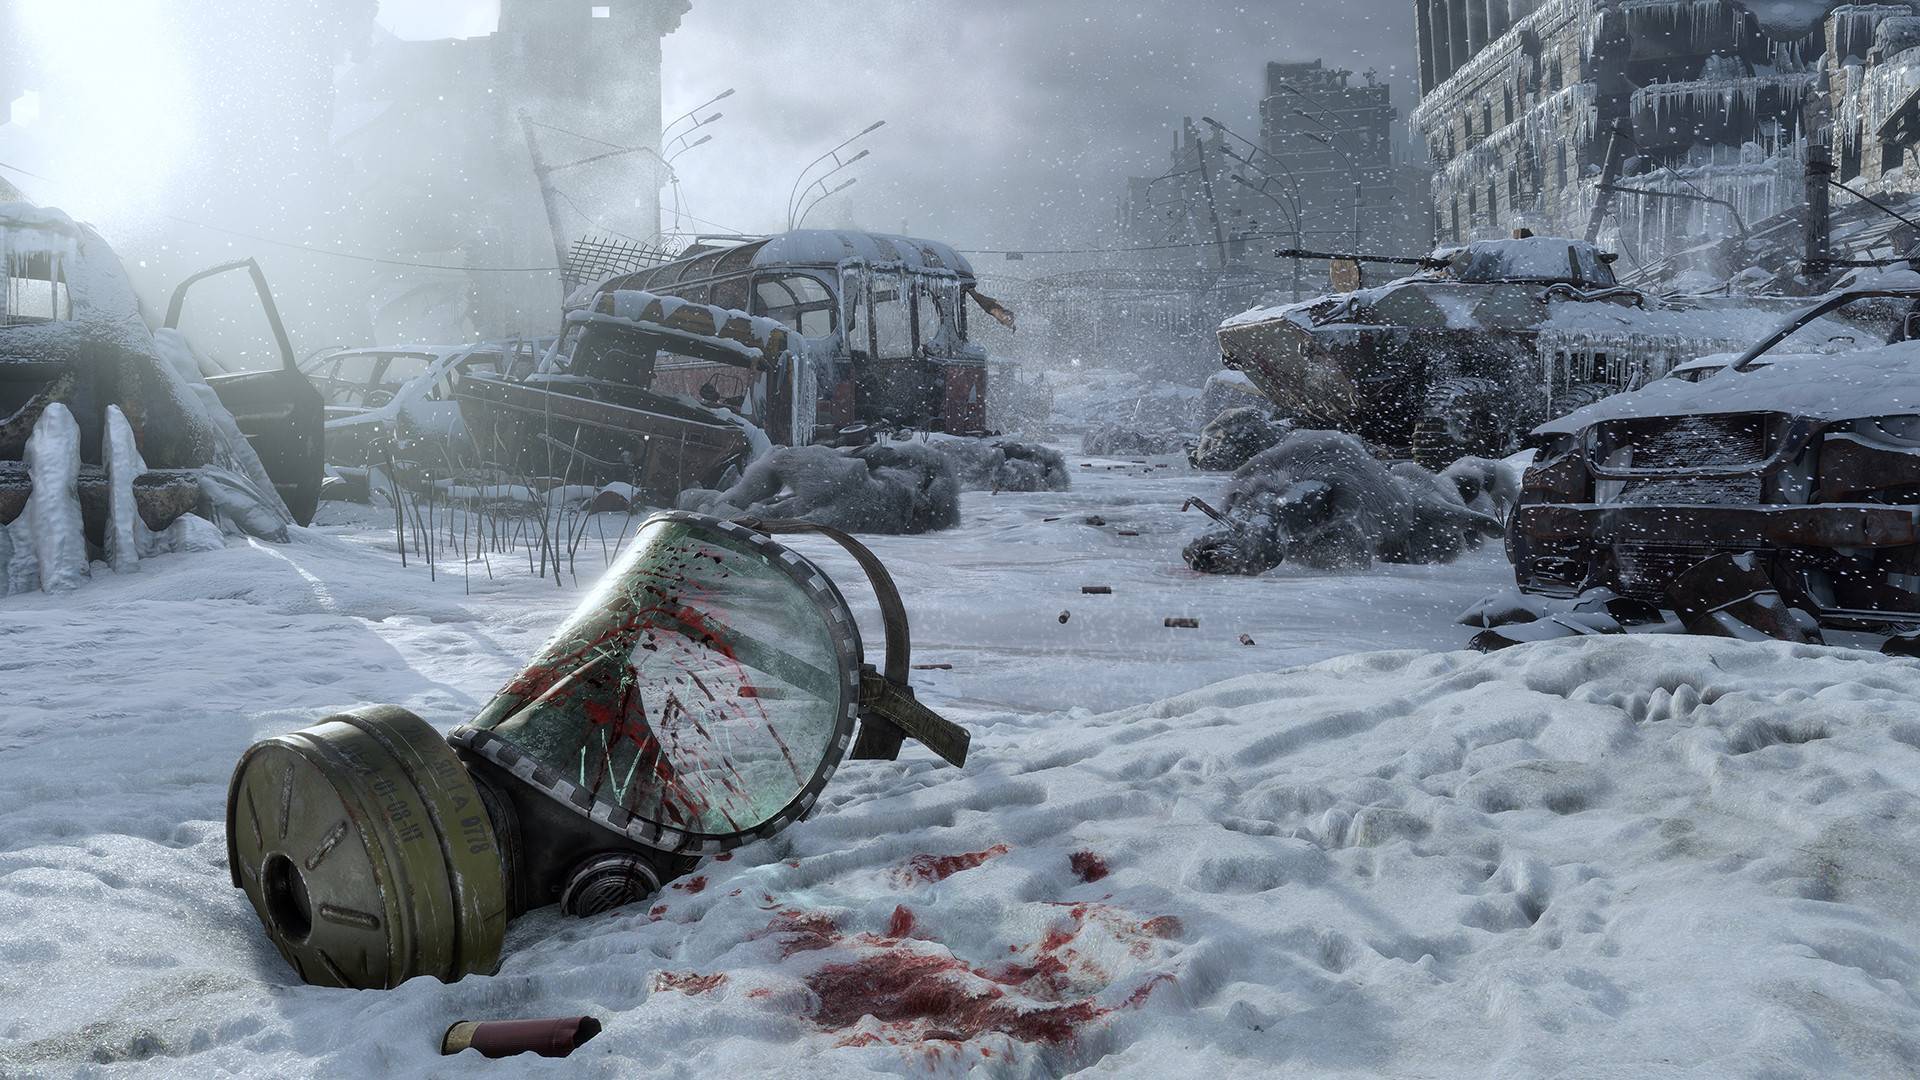 where can i buy metro exodus for pc